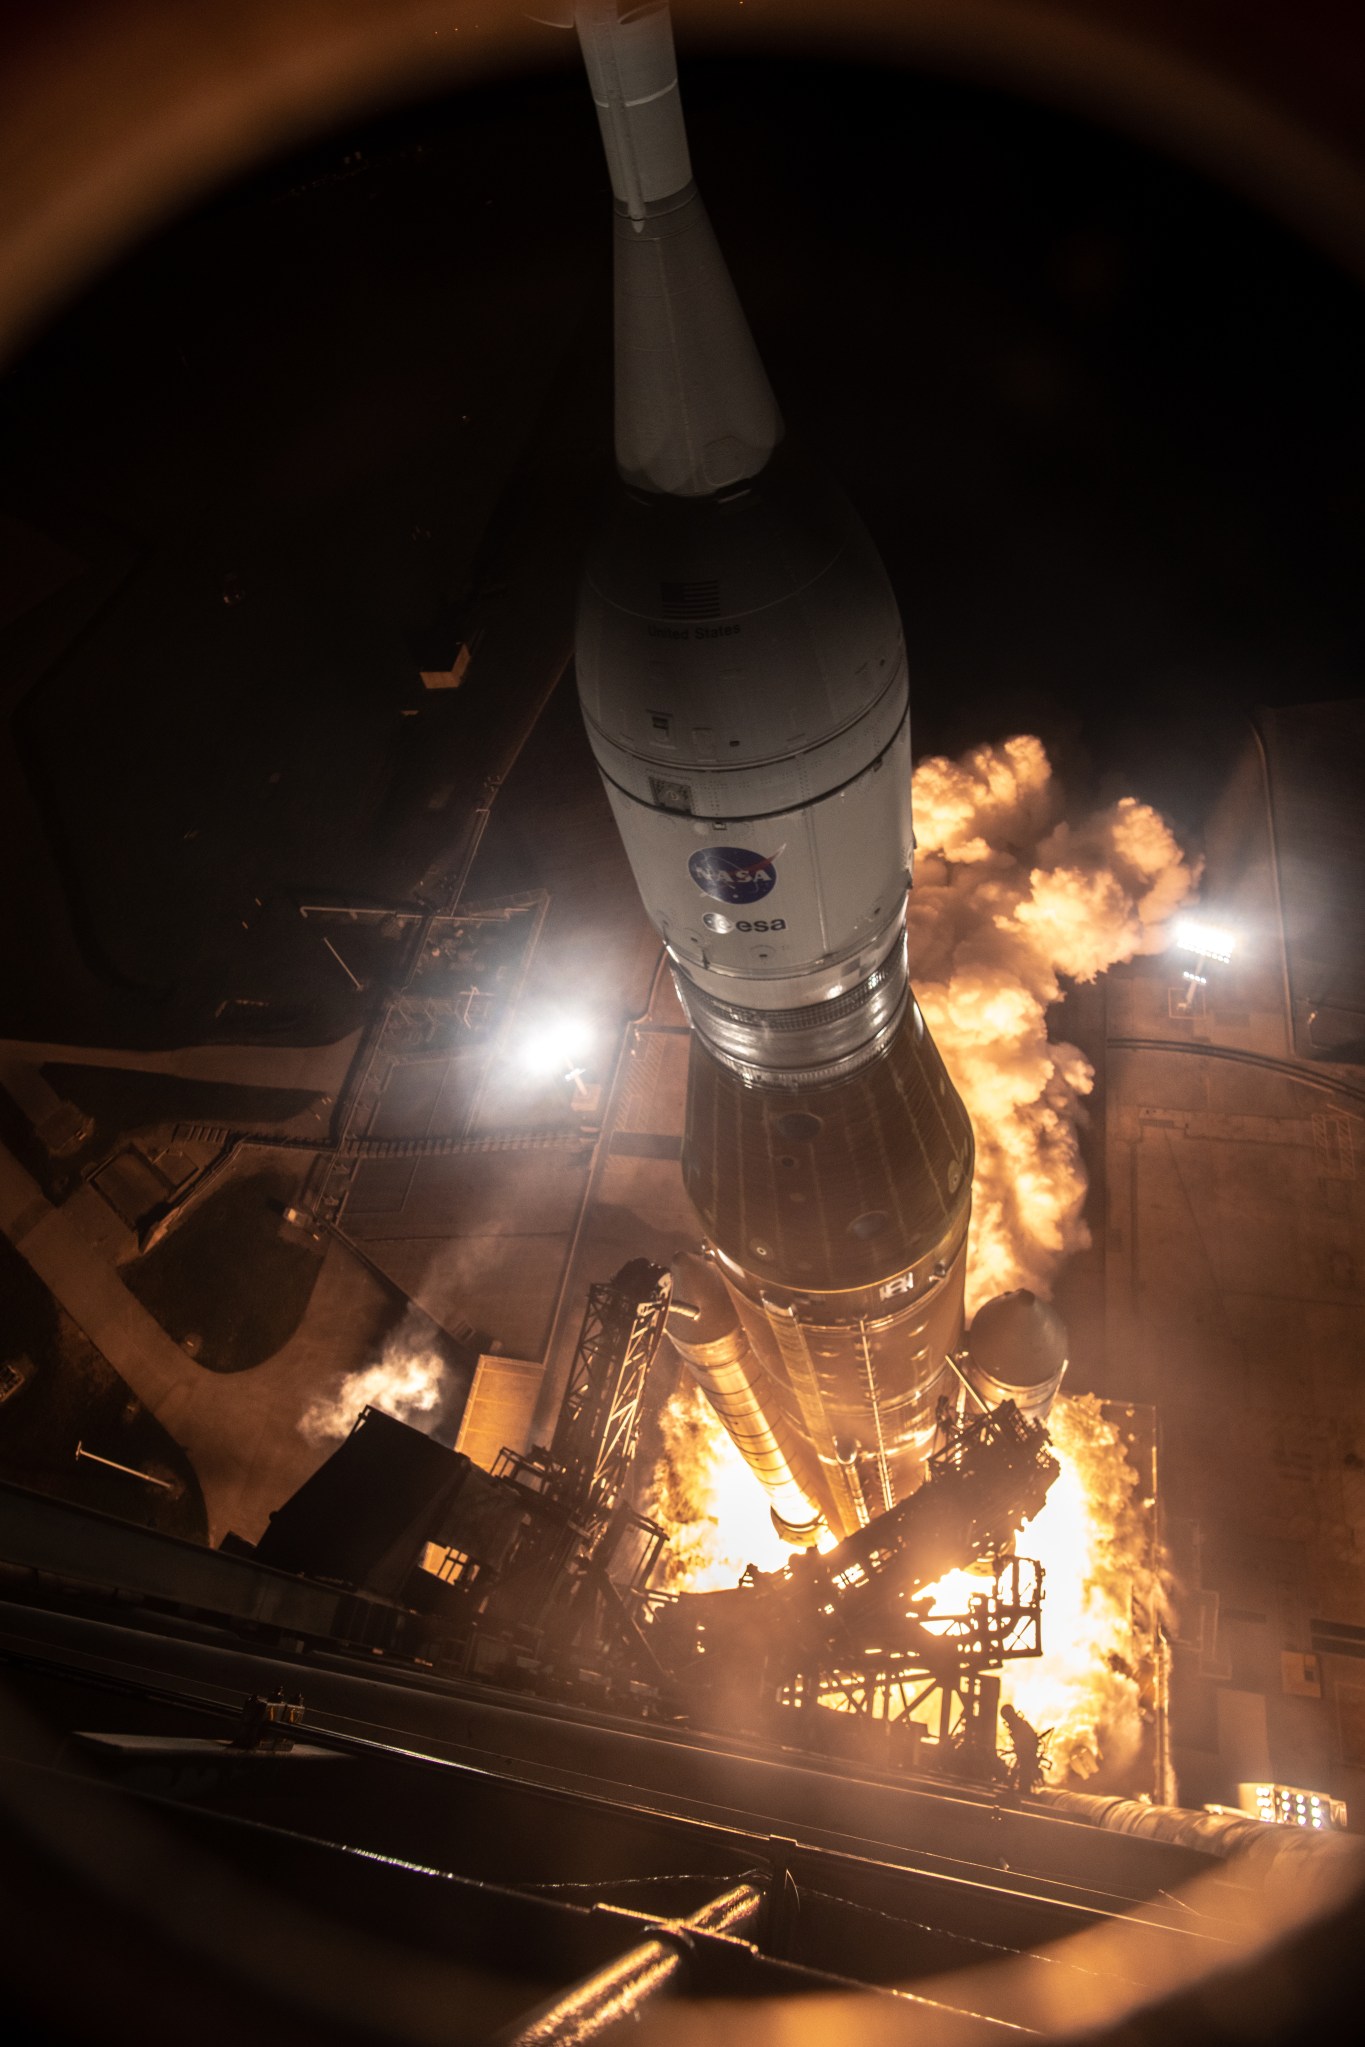 A bird's eye view from high up on the mobile launcher shows the Space Launch System rocket's liftoff. Fire from the engines can be seen.